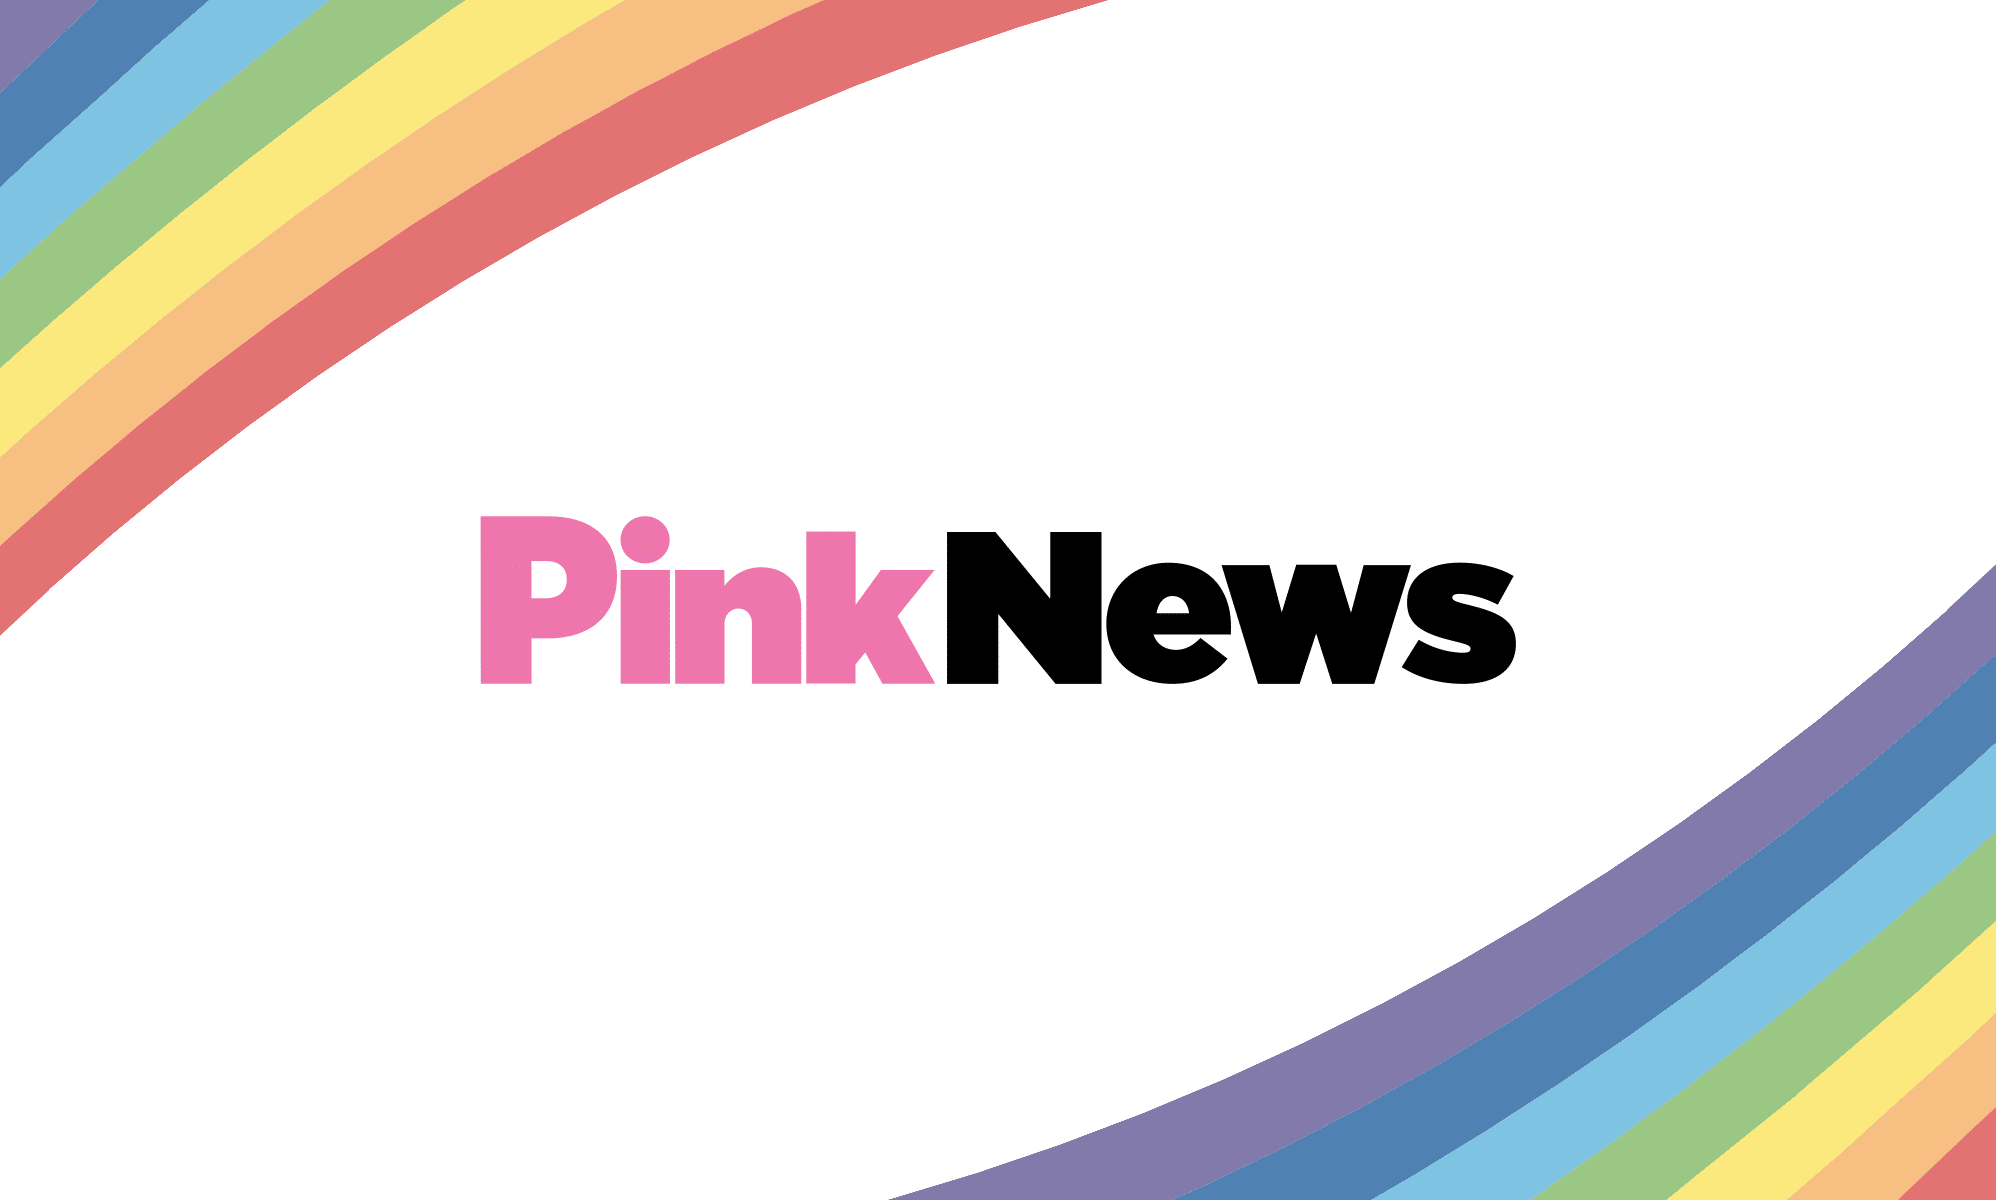 PinkNews.co.uk&#8217;s top 50 Twitter users influencing LGBT life in 2011